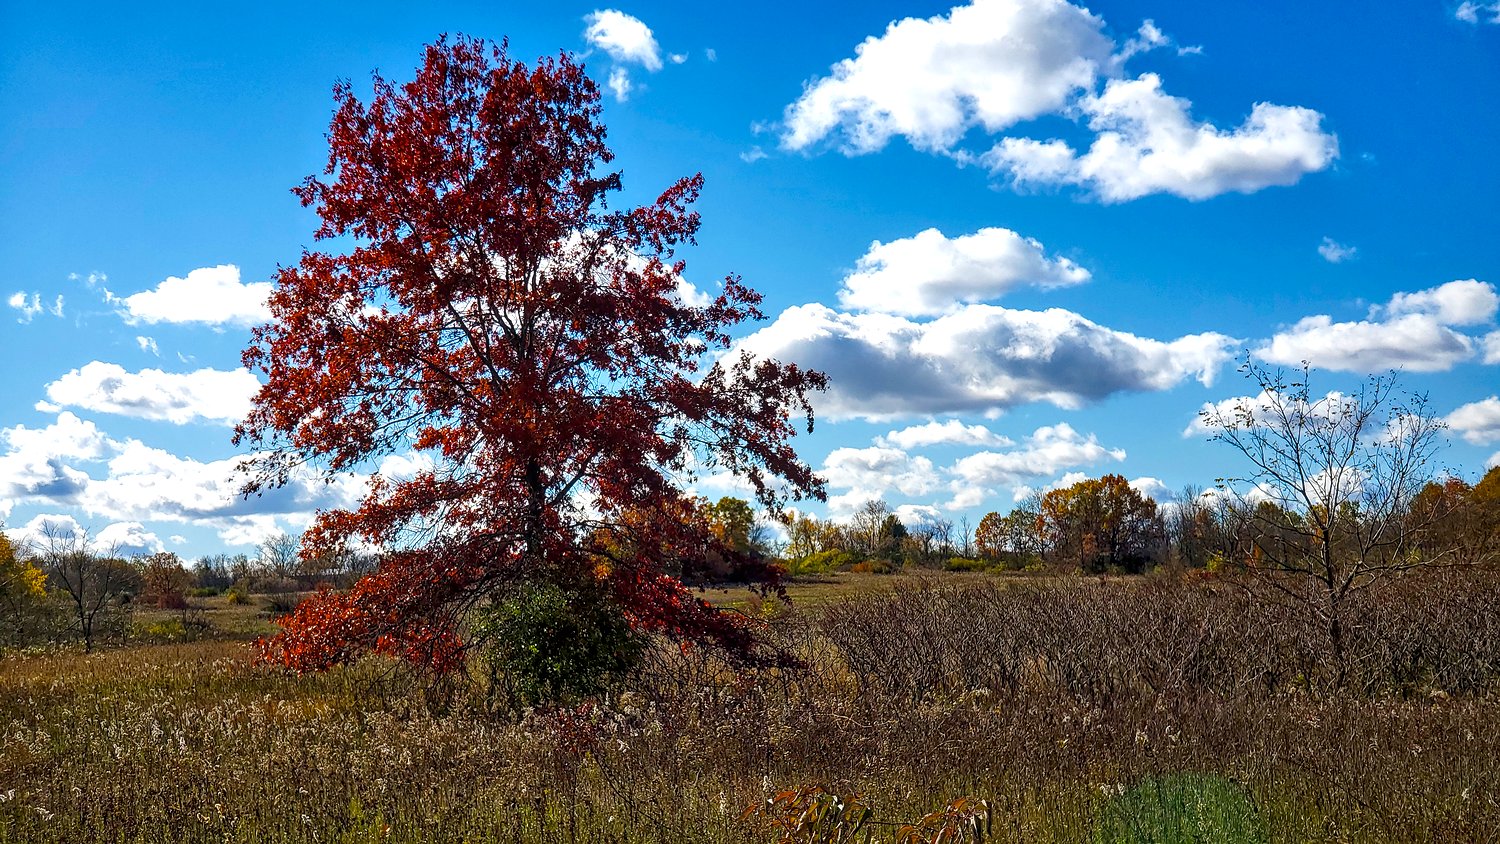 Vibrant red leaves on tree surrounded by grasses and forbs at Rush Creek Conservation Area.